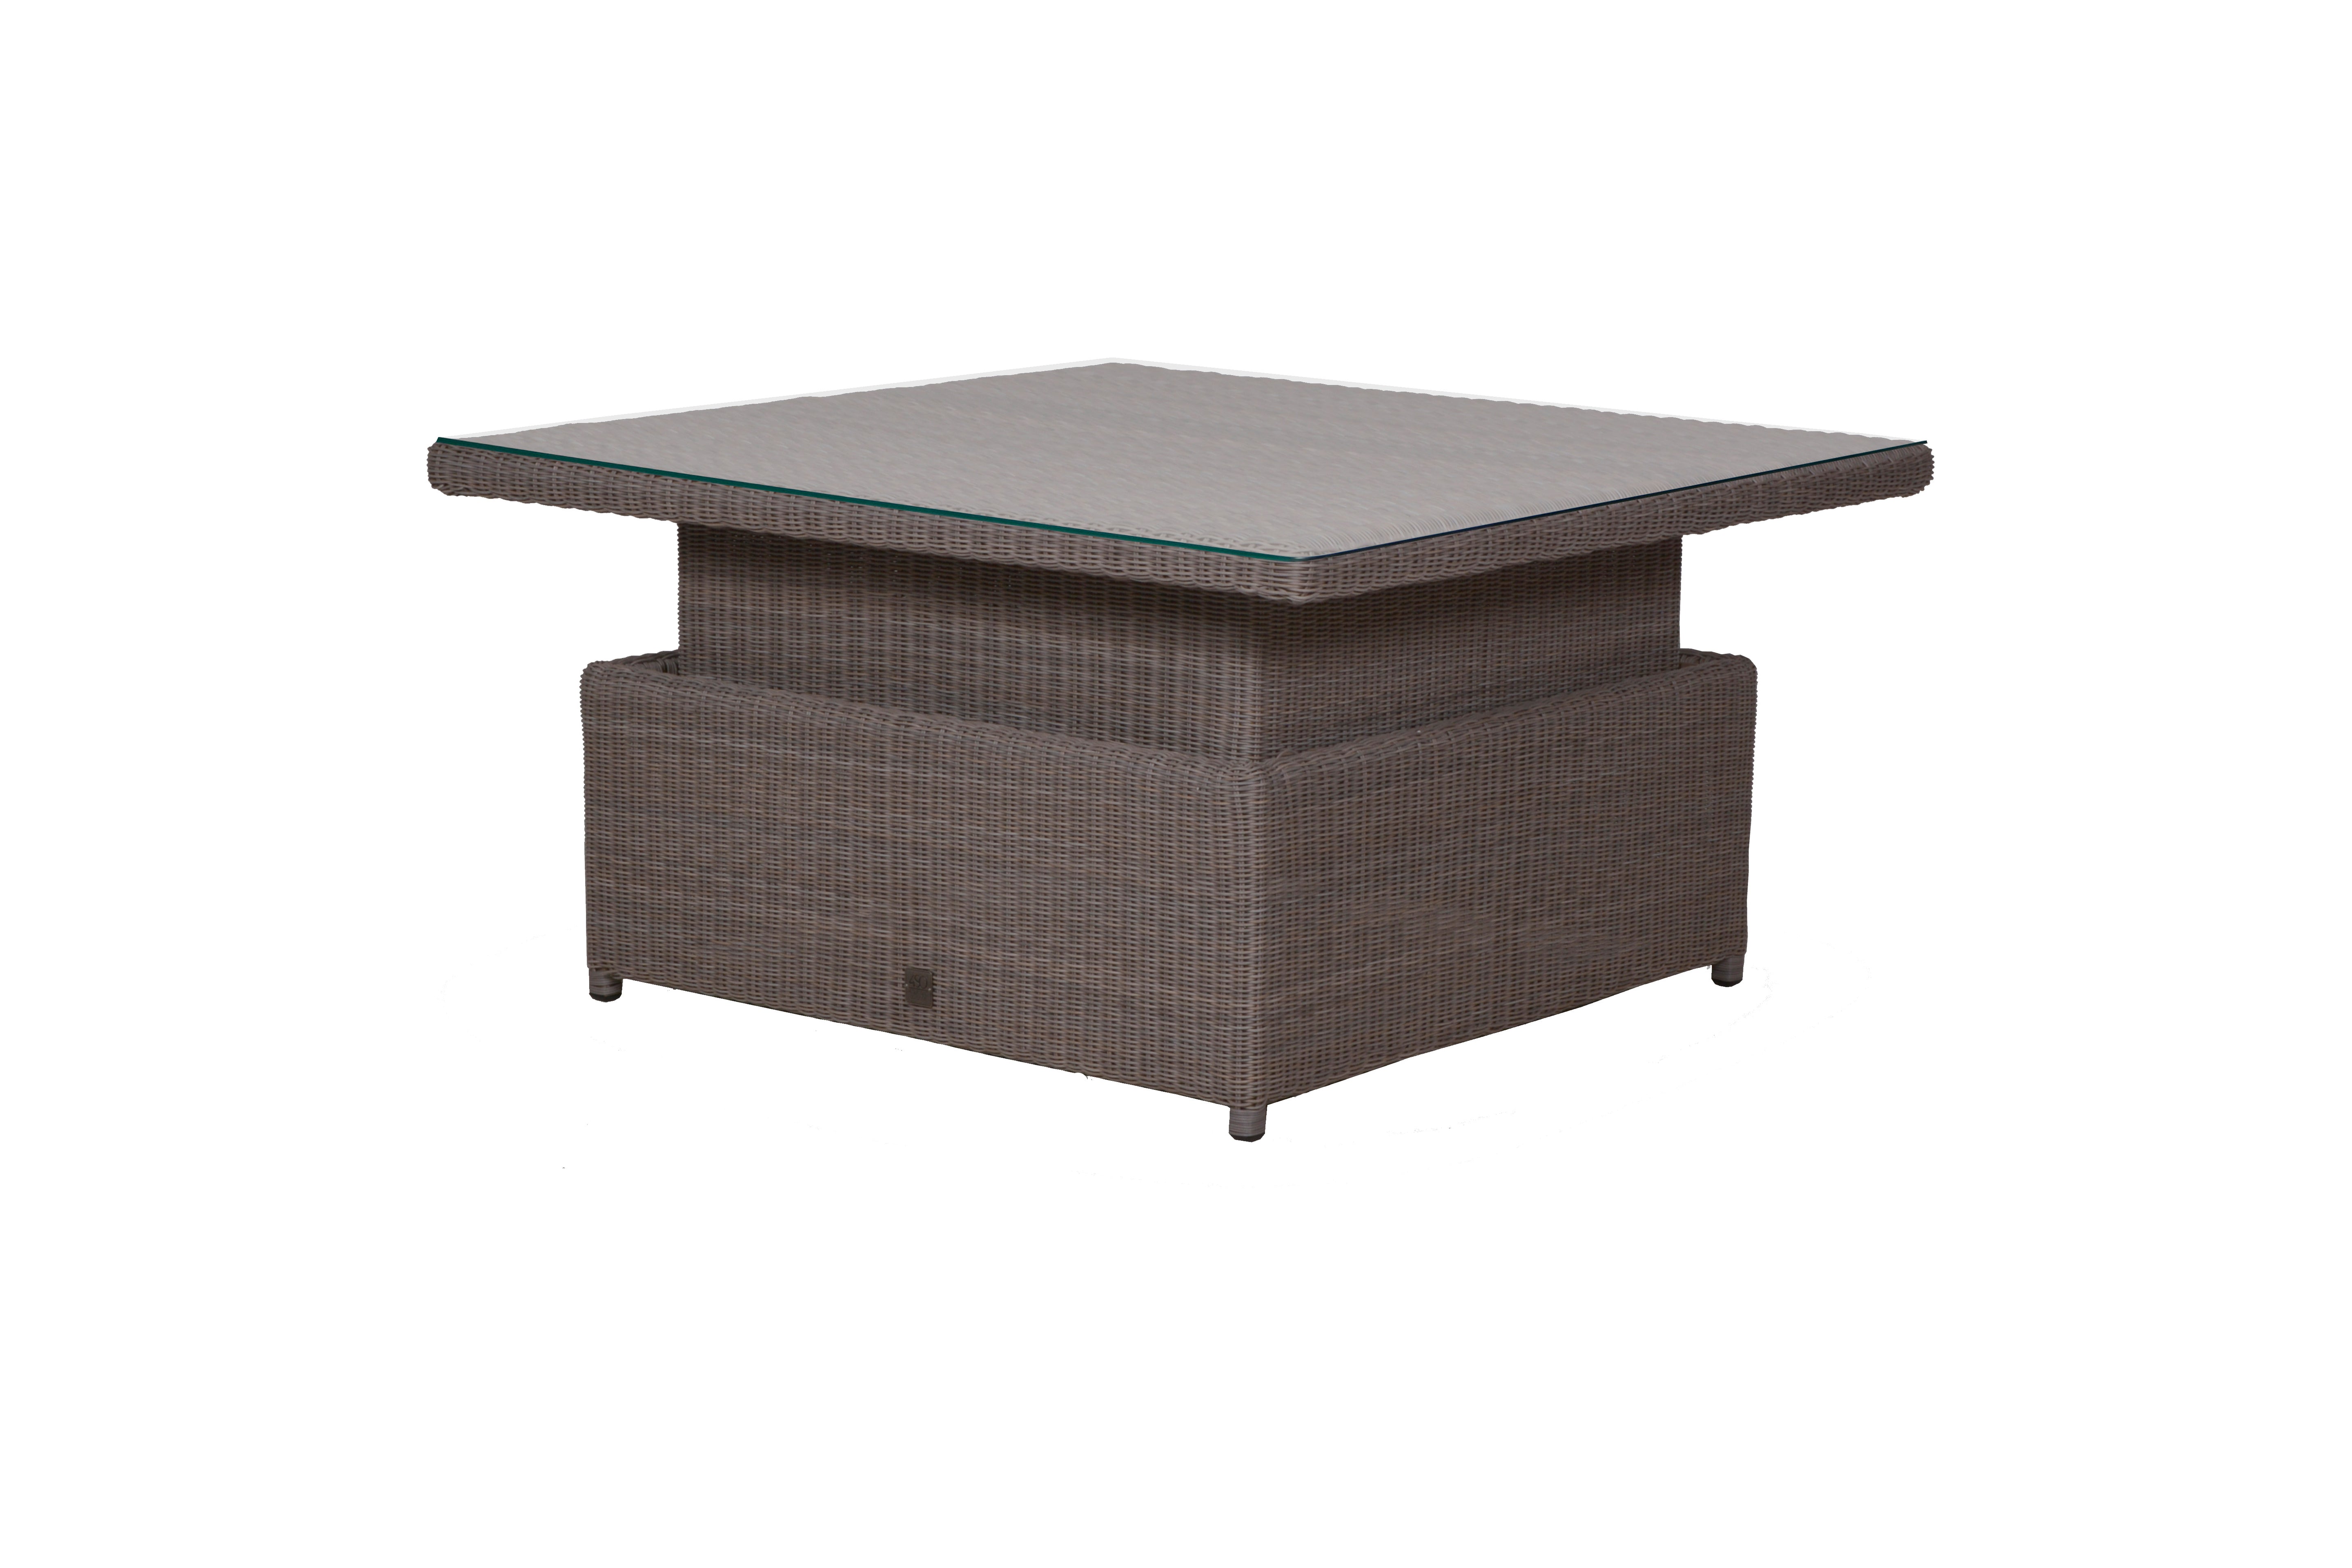 4 Seasons Outdoor Memphis Adjustable Dining Table Glass Top 125x125cm